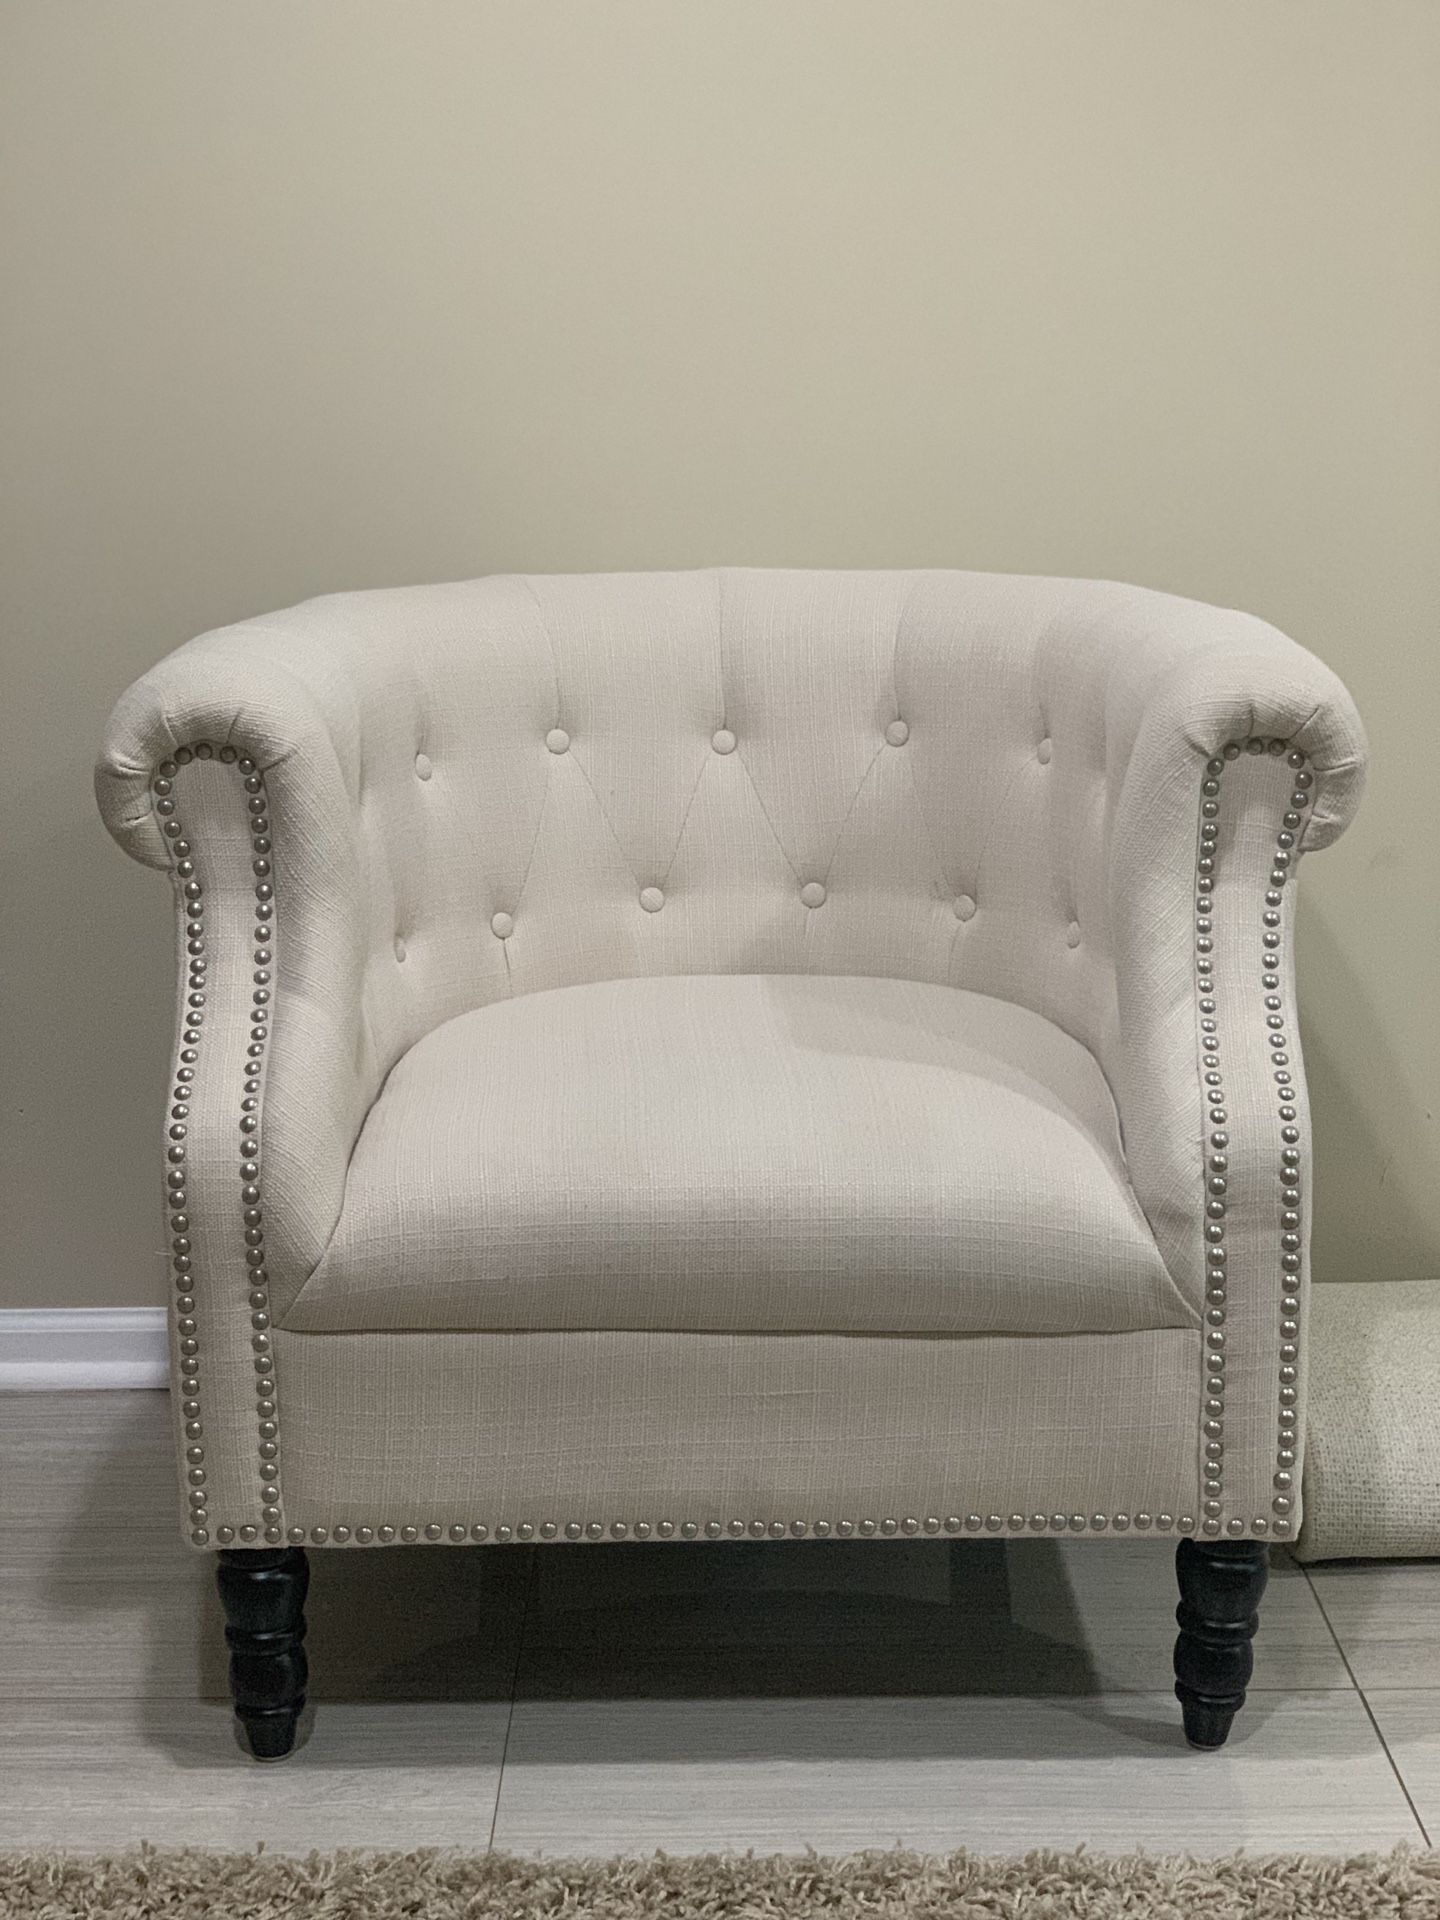 MOVING SALE! Gorgeous accent chair